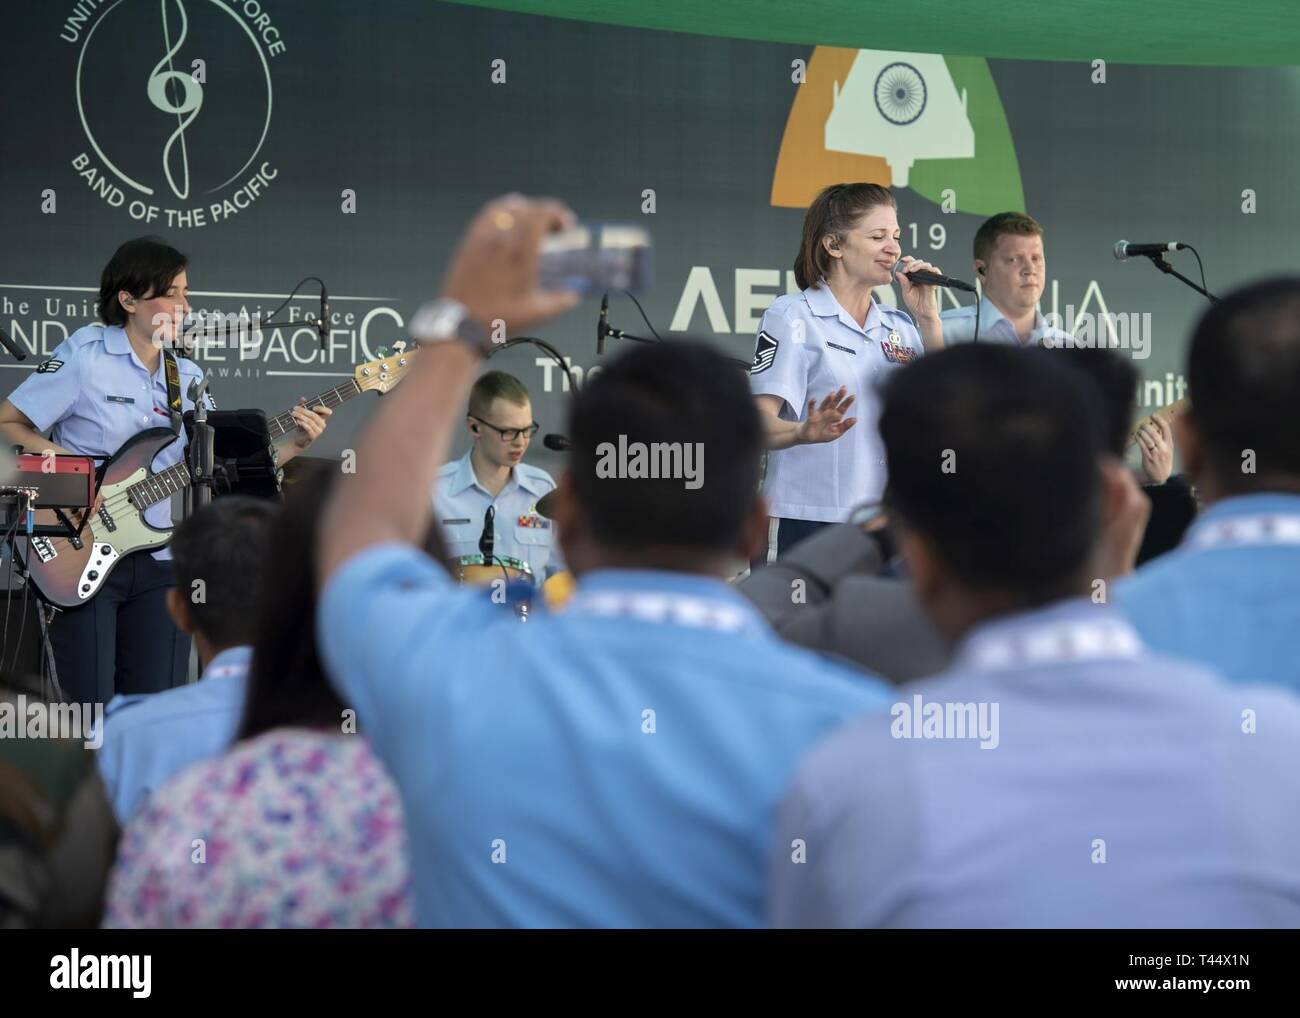 U.S. Air Force Band of the Pacific members perform for a crowd during Aero India 2019, Feb. 23, at Air Force Station Yelahanka, Bengaluru, India. The airshow is an opportunity to strengthen bonds between the U.S. and international partners. Stock Photo